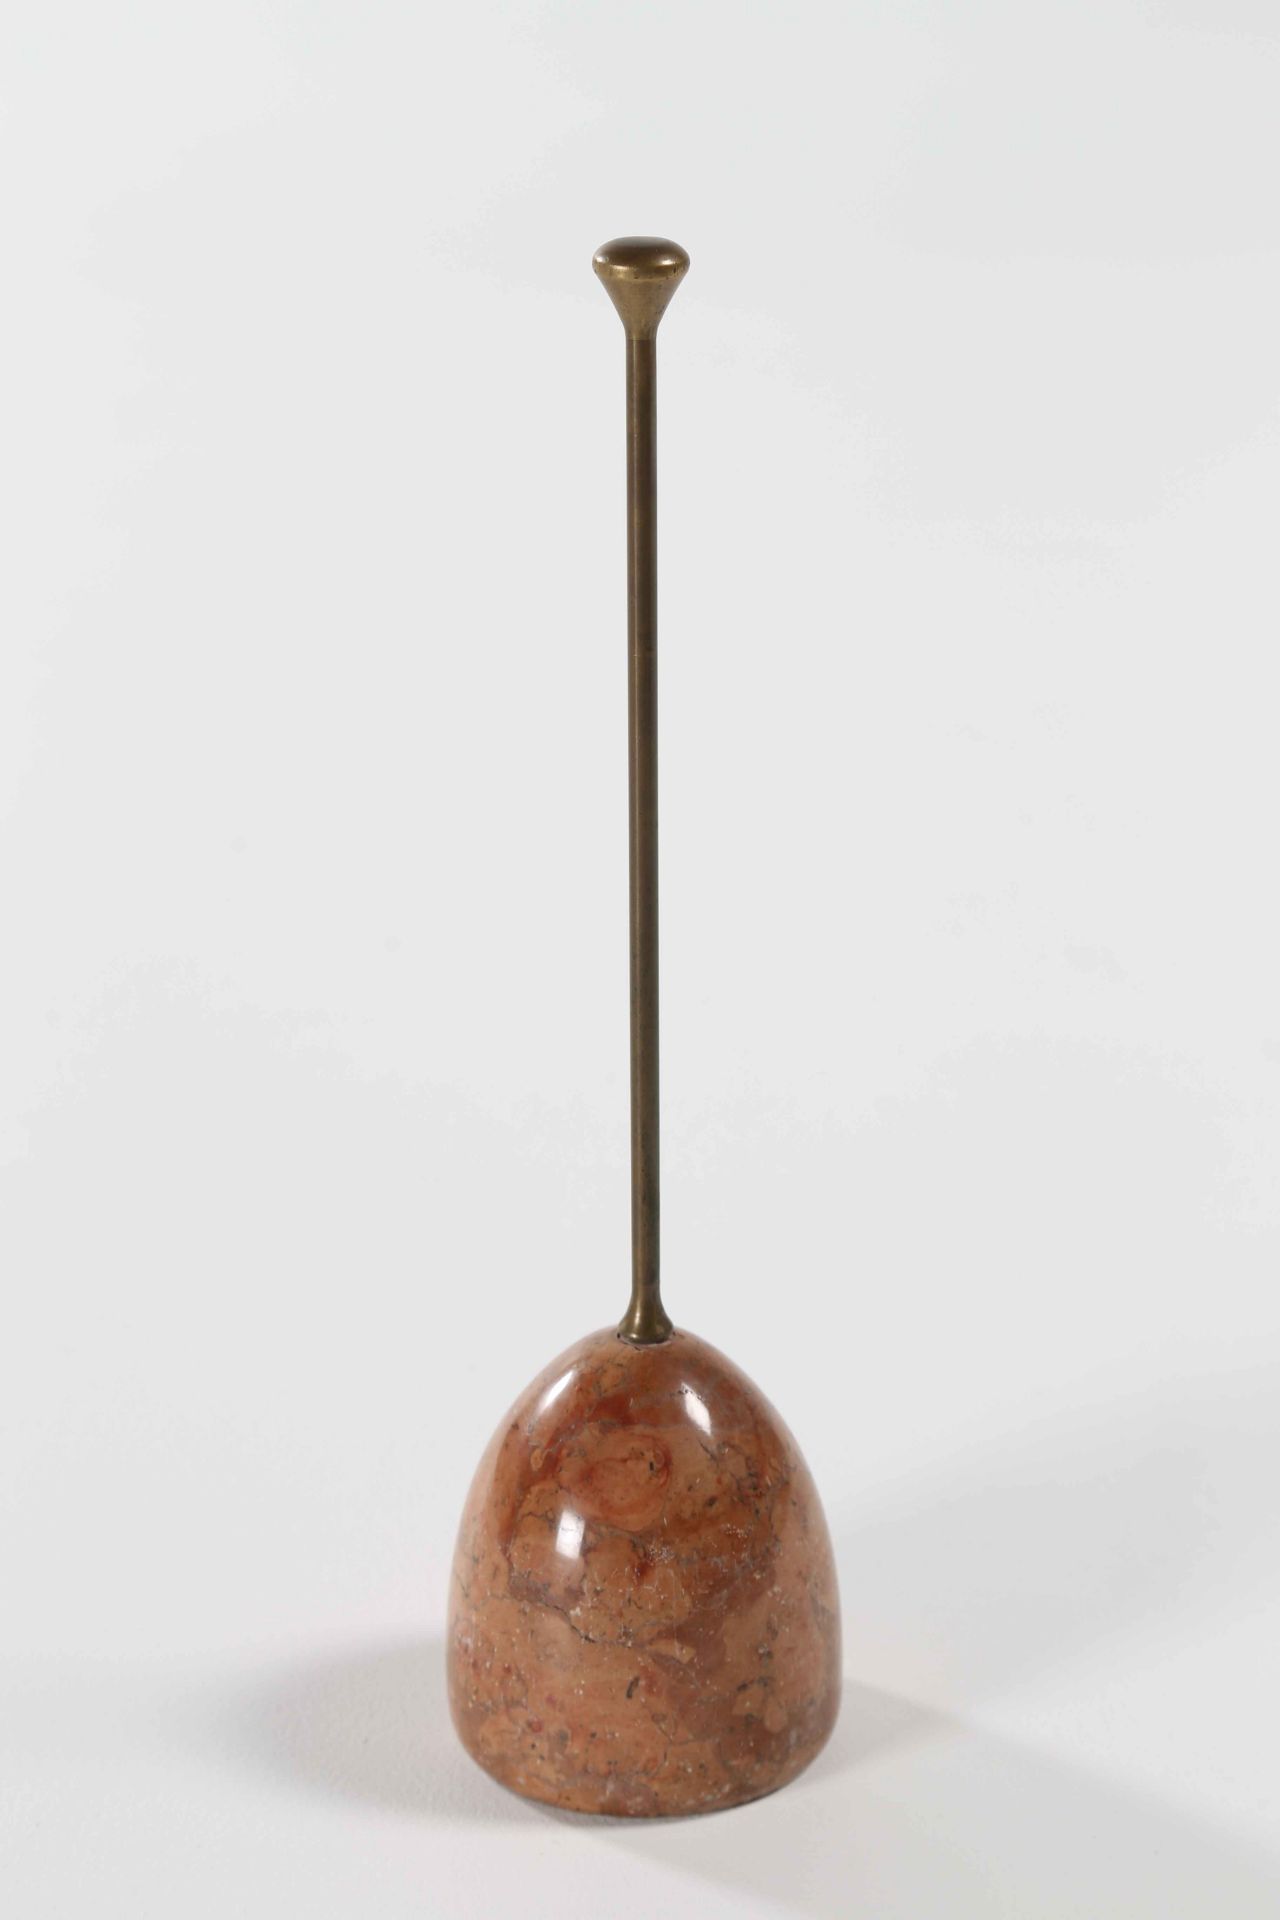 CACCIA DOMINIONI LUIGI (n. 1913)
Door stop.
Made for Azucena Milan in Veronese red marble and brass.